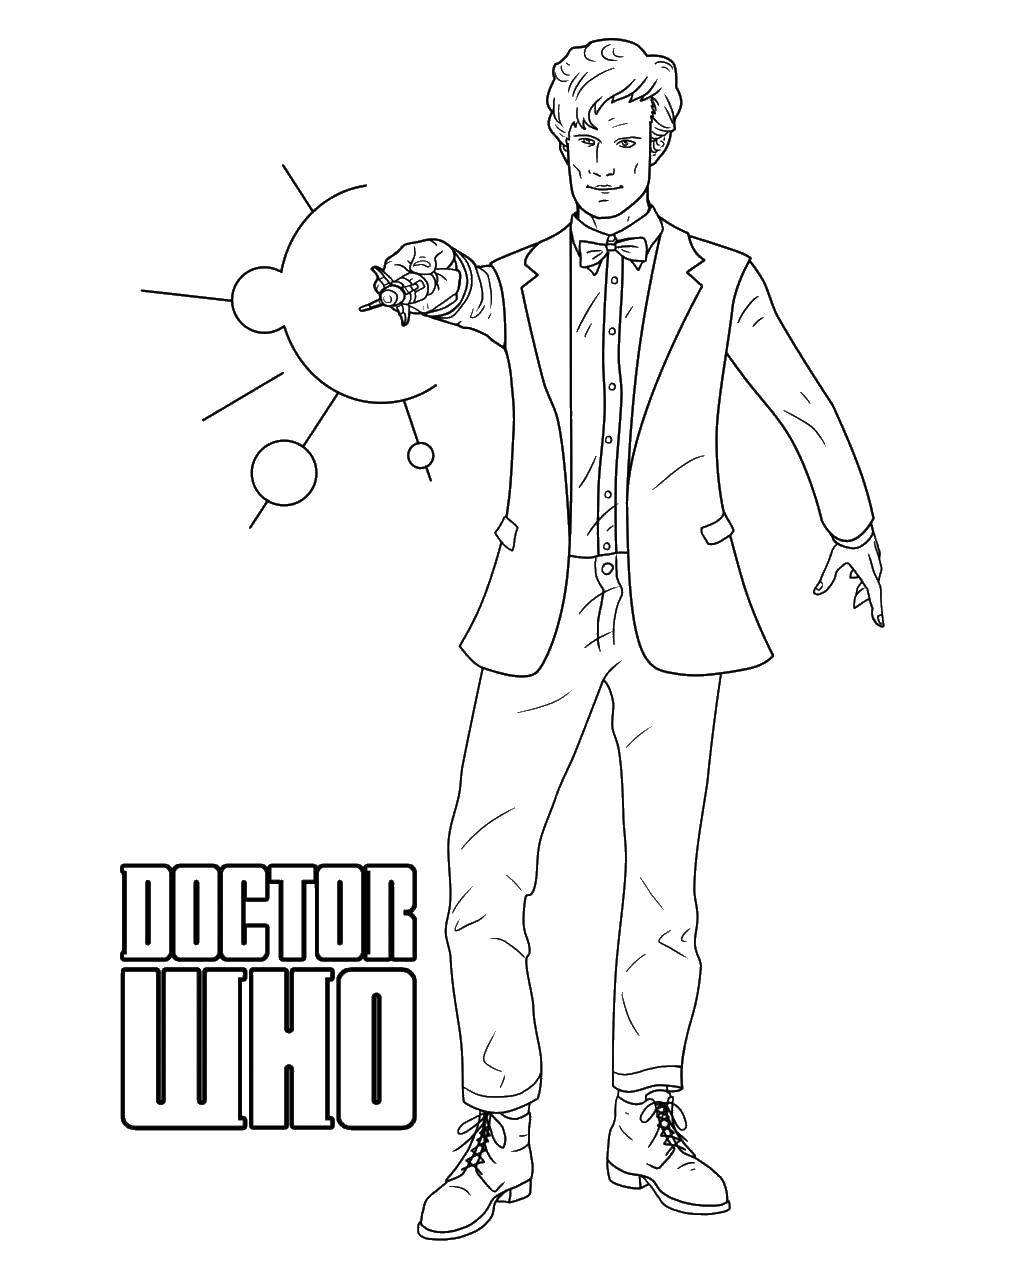 Coloring Doctor who. Category Medical coloring pages. Tags:  doctor who, suit.